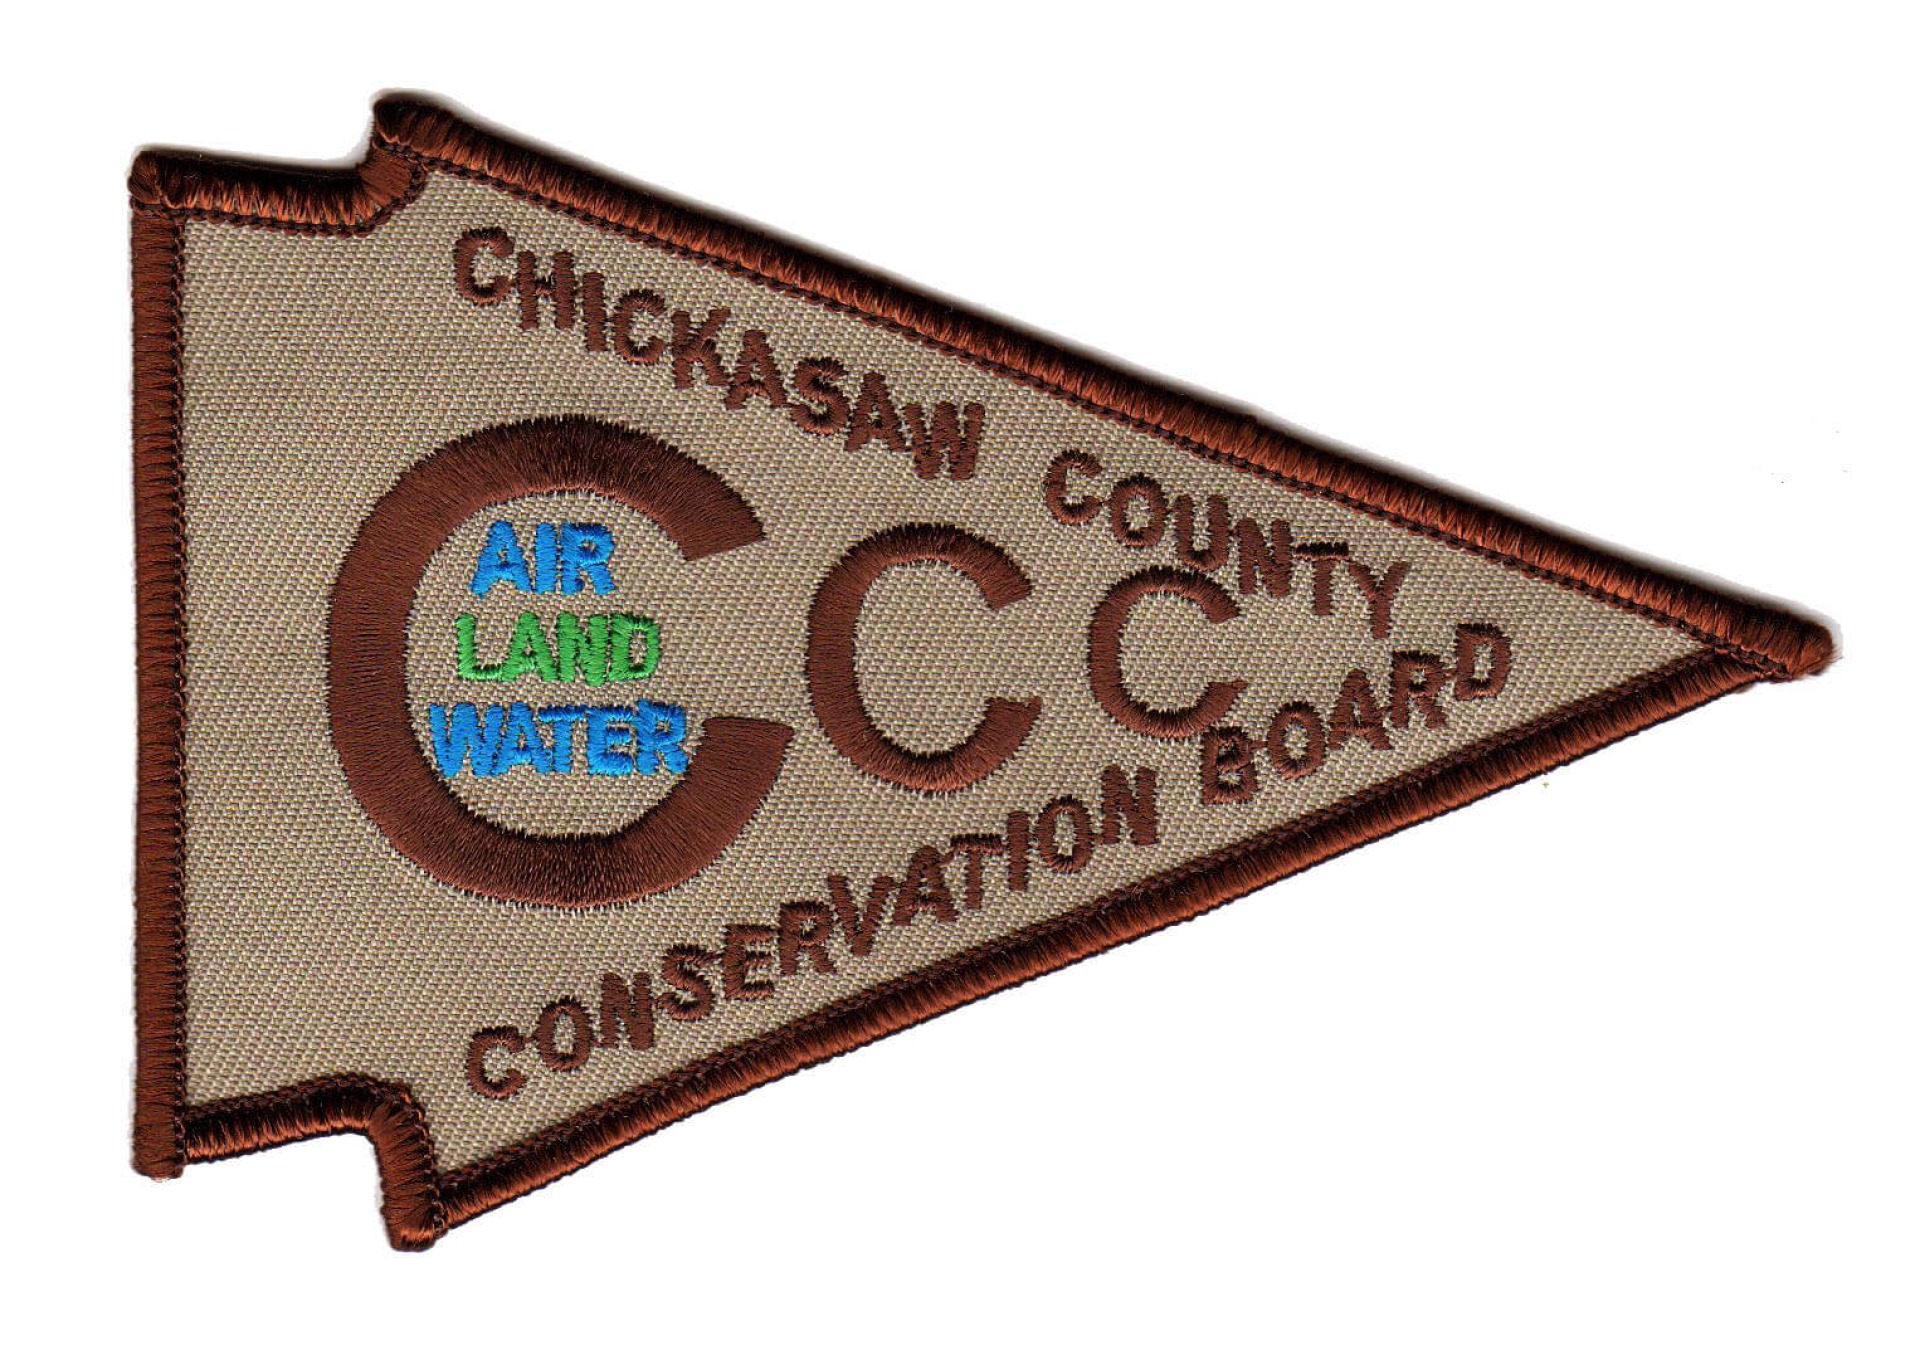 Chickasaw County Conservation patch